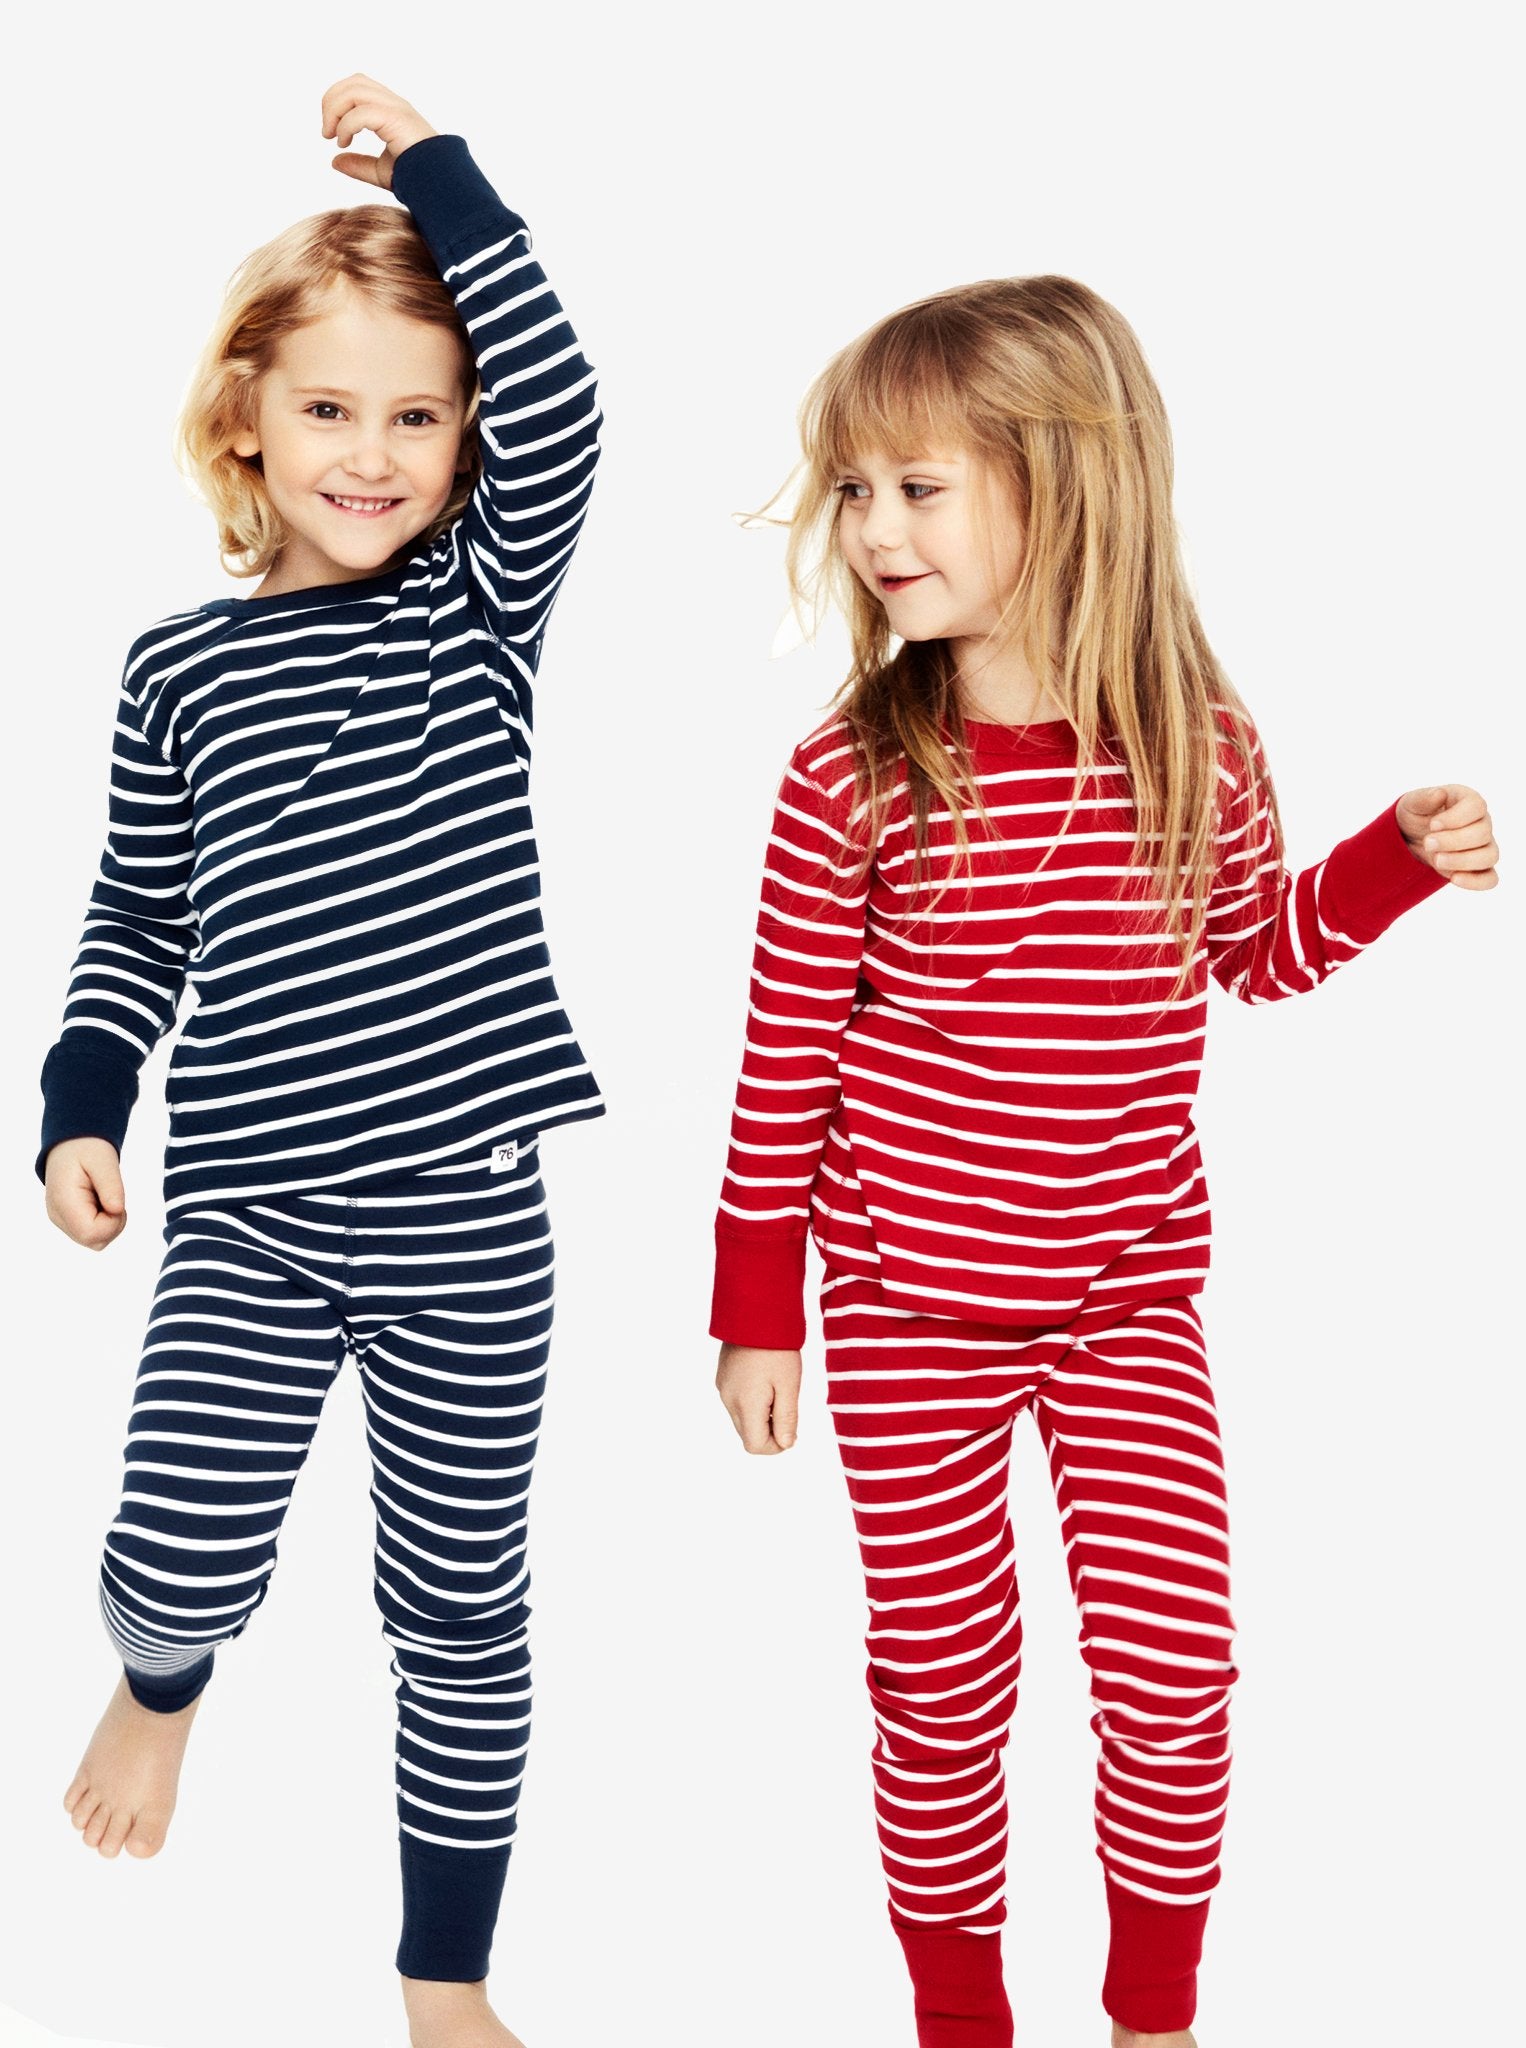 red and white stripes kids leggings, ethical organic cotton, long lasting polarn o. pyret quality, kids wearing PO.P classic top and leggings in stripe design 